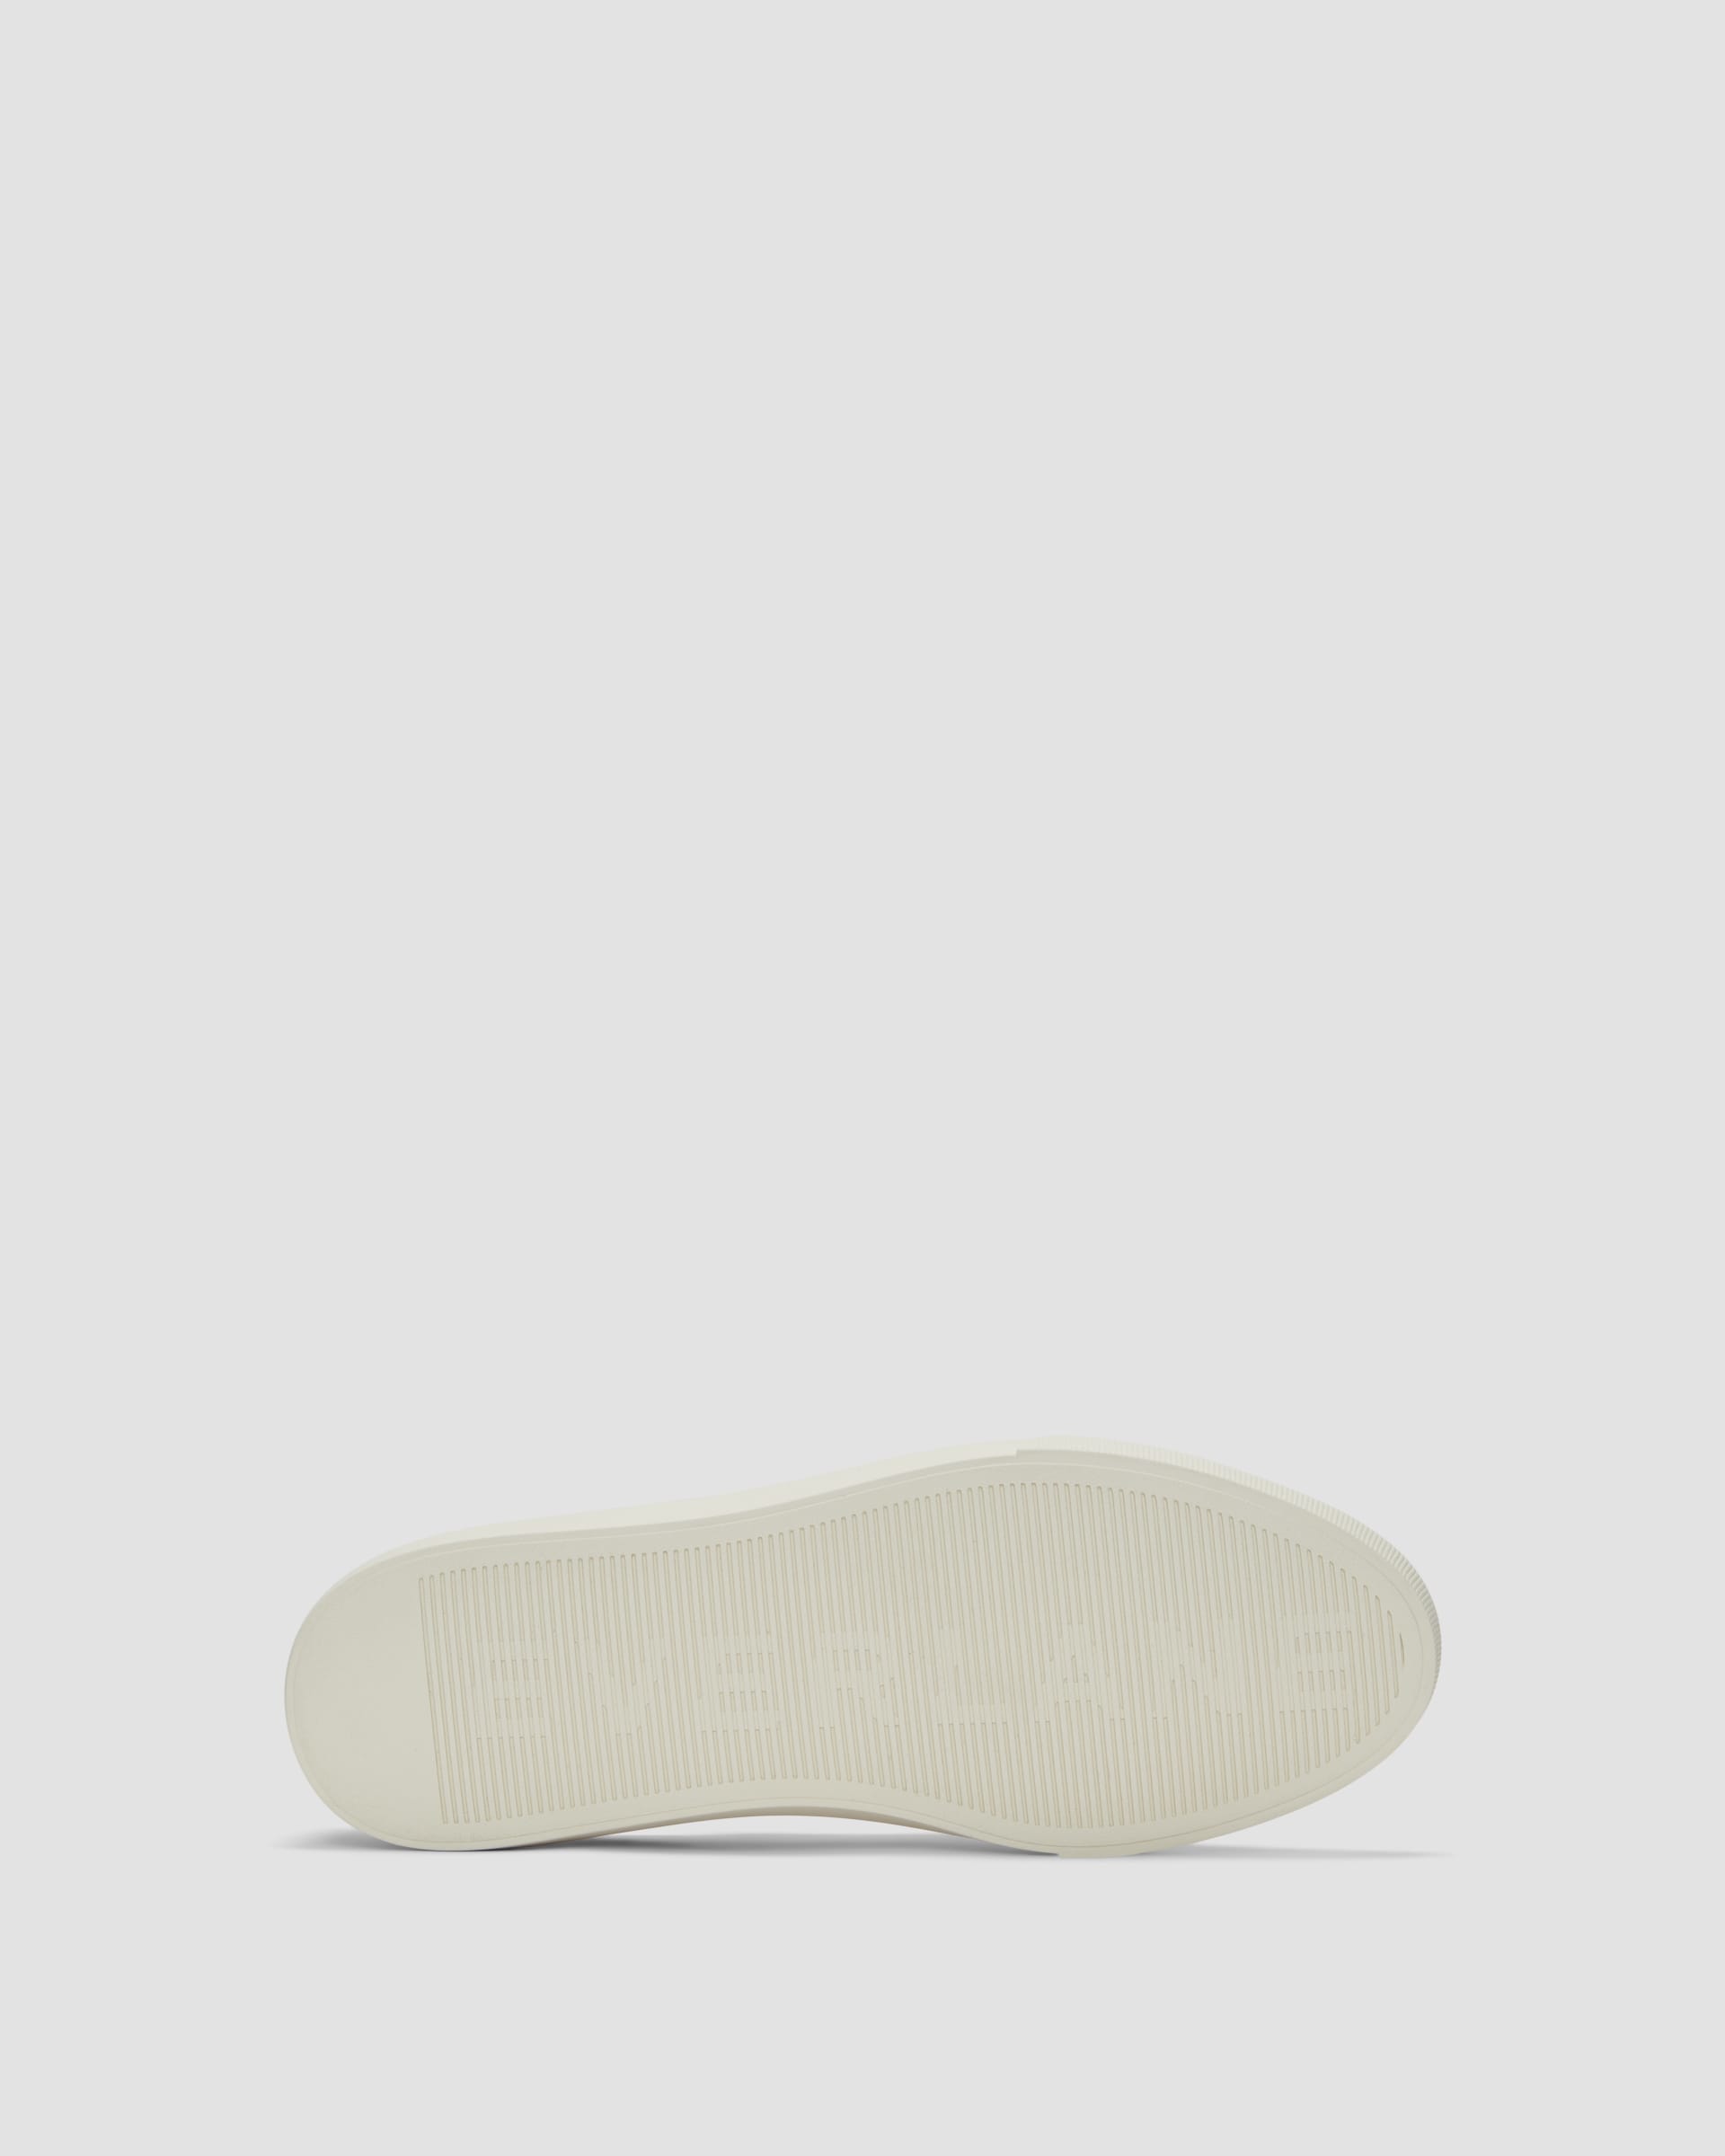 The Day Sneaker Parchment – Everlane